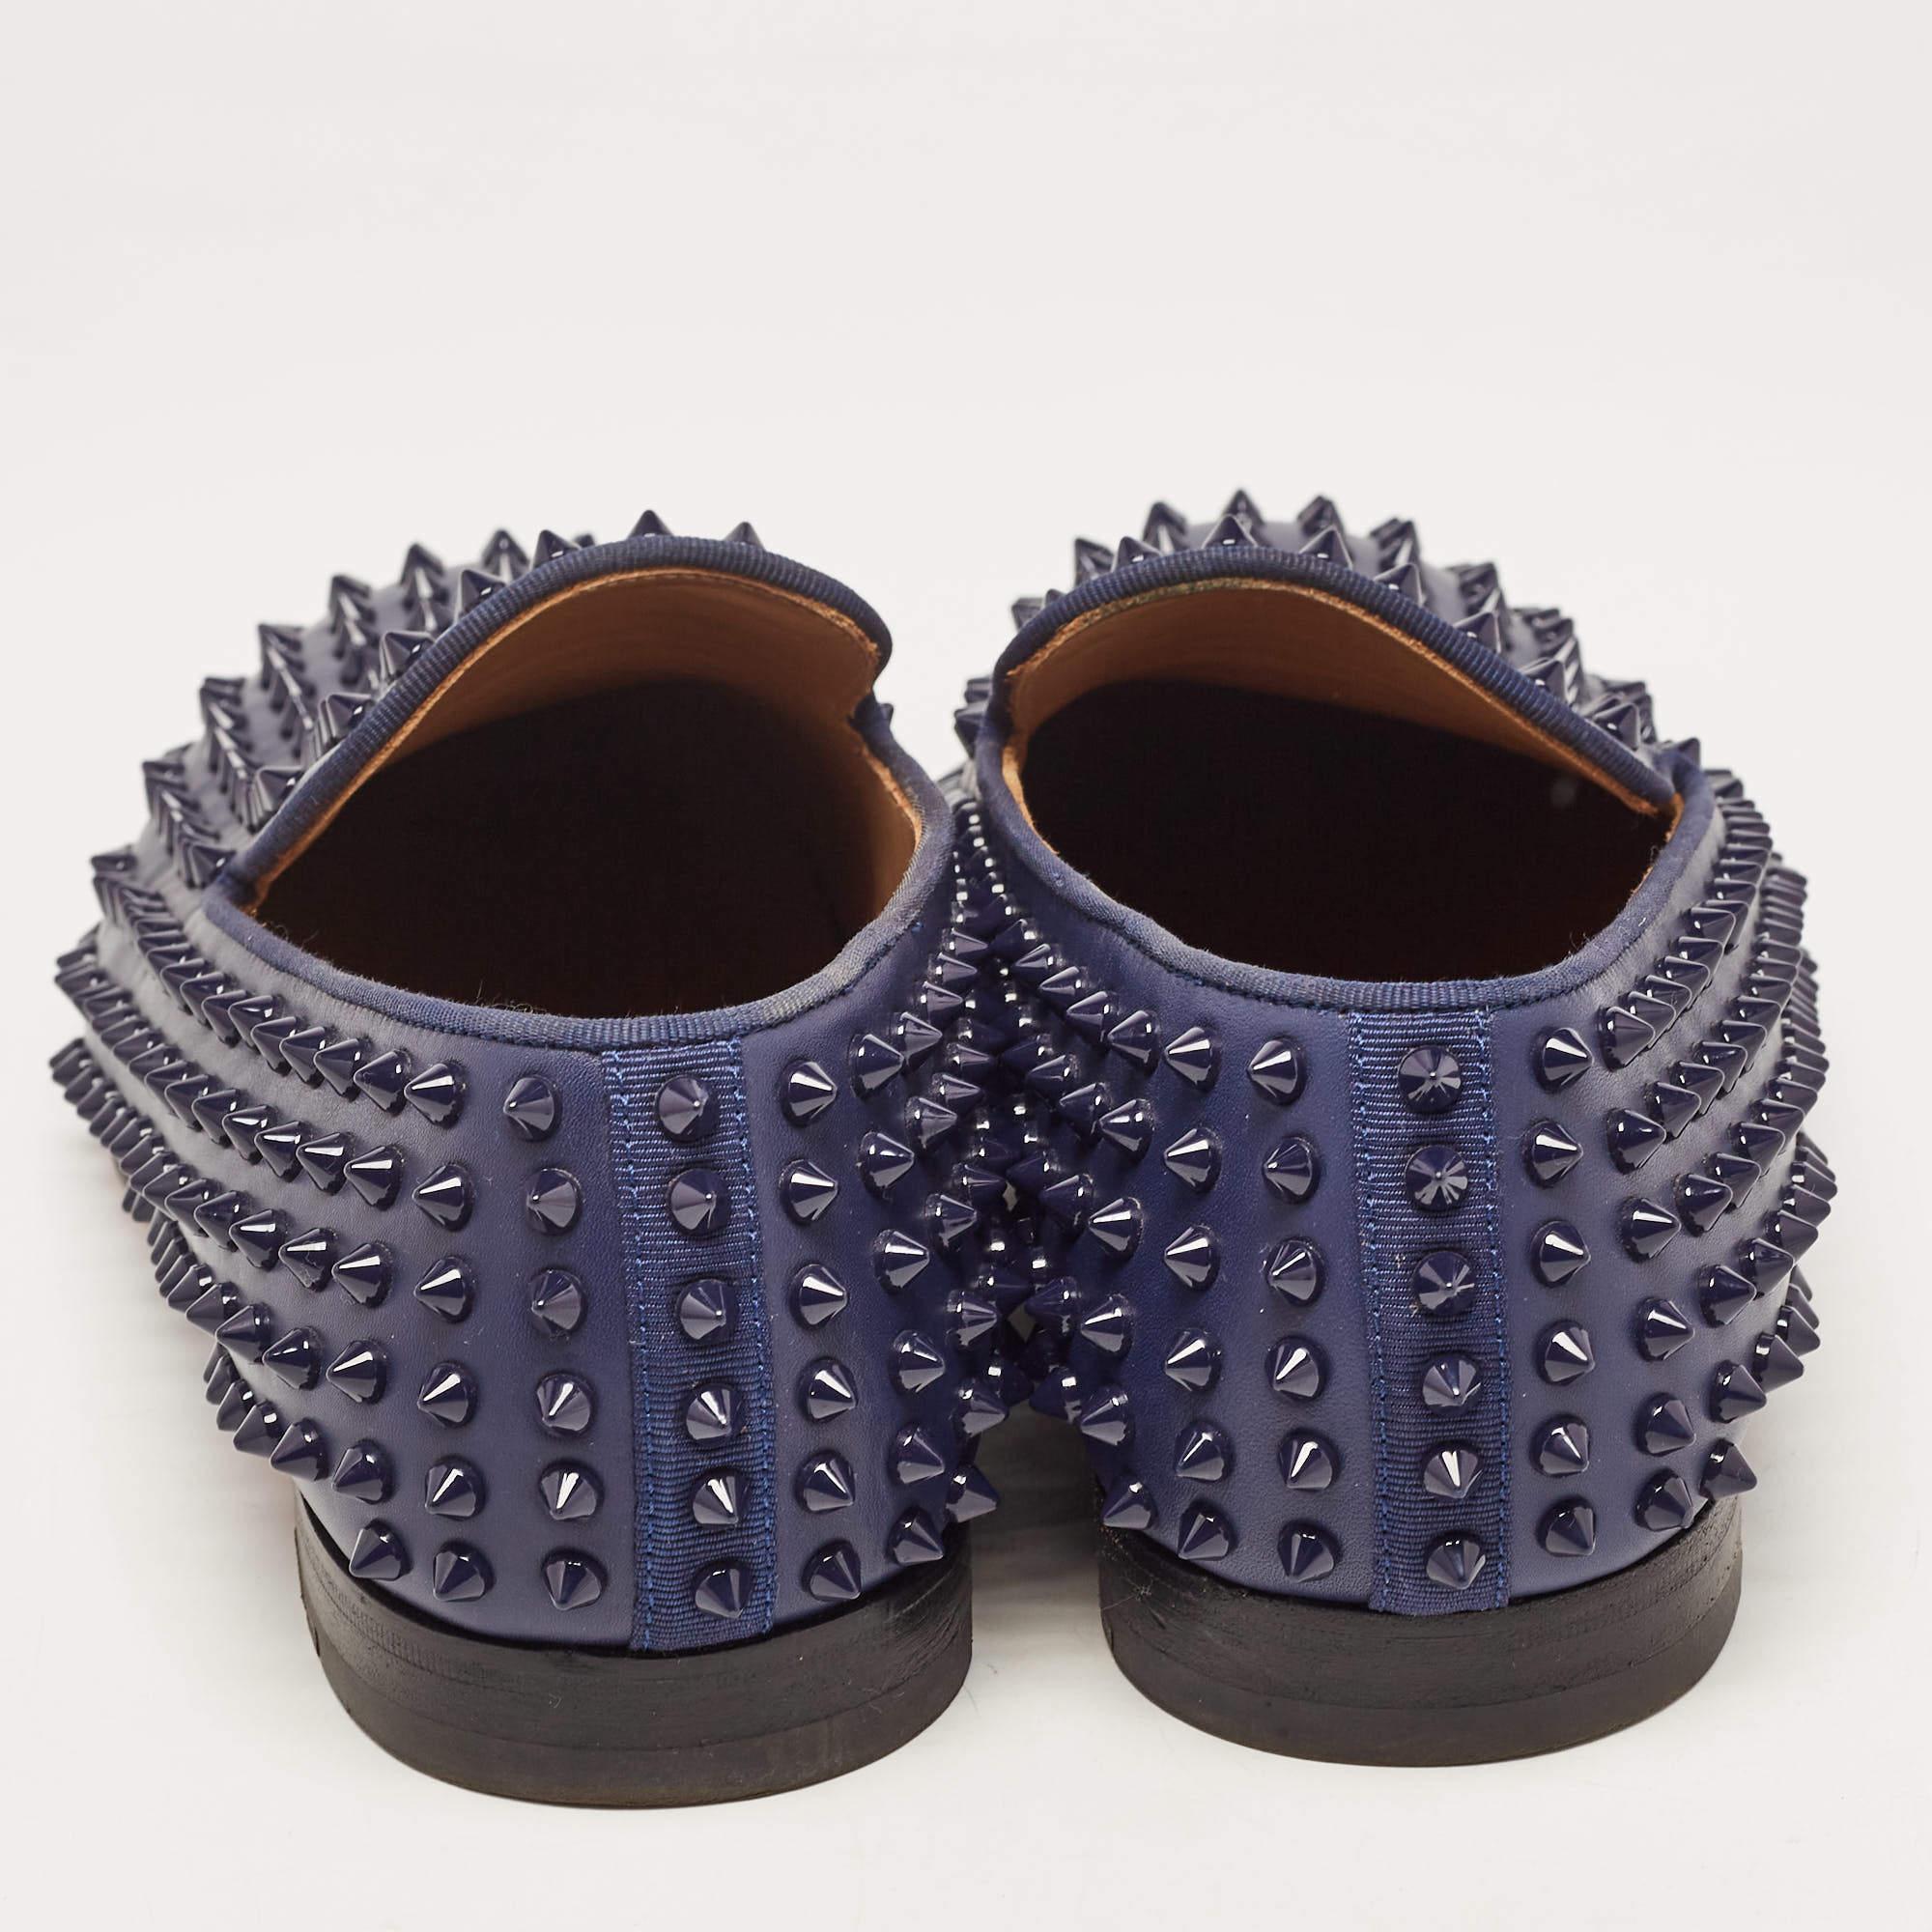 Christian Louboutin Navy Blue Leather Dandelion Spike Smoking Slippers Size 42.5 In Excellent Condition For Sale In Dubai, Al Qouz 2